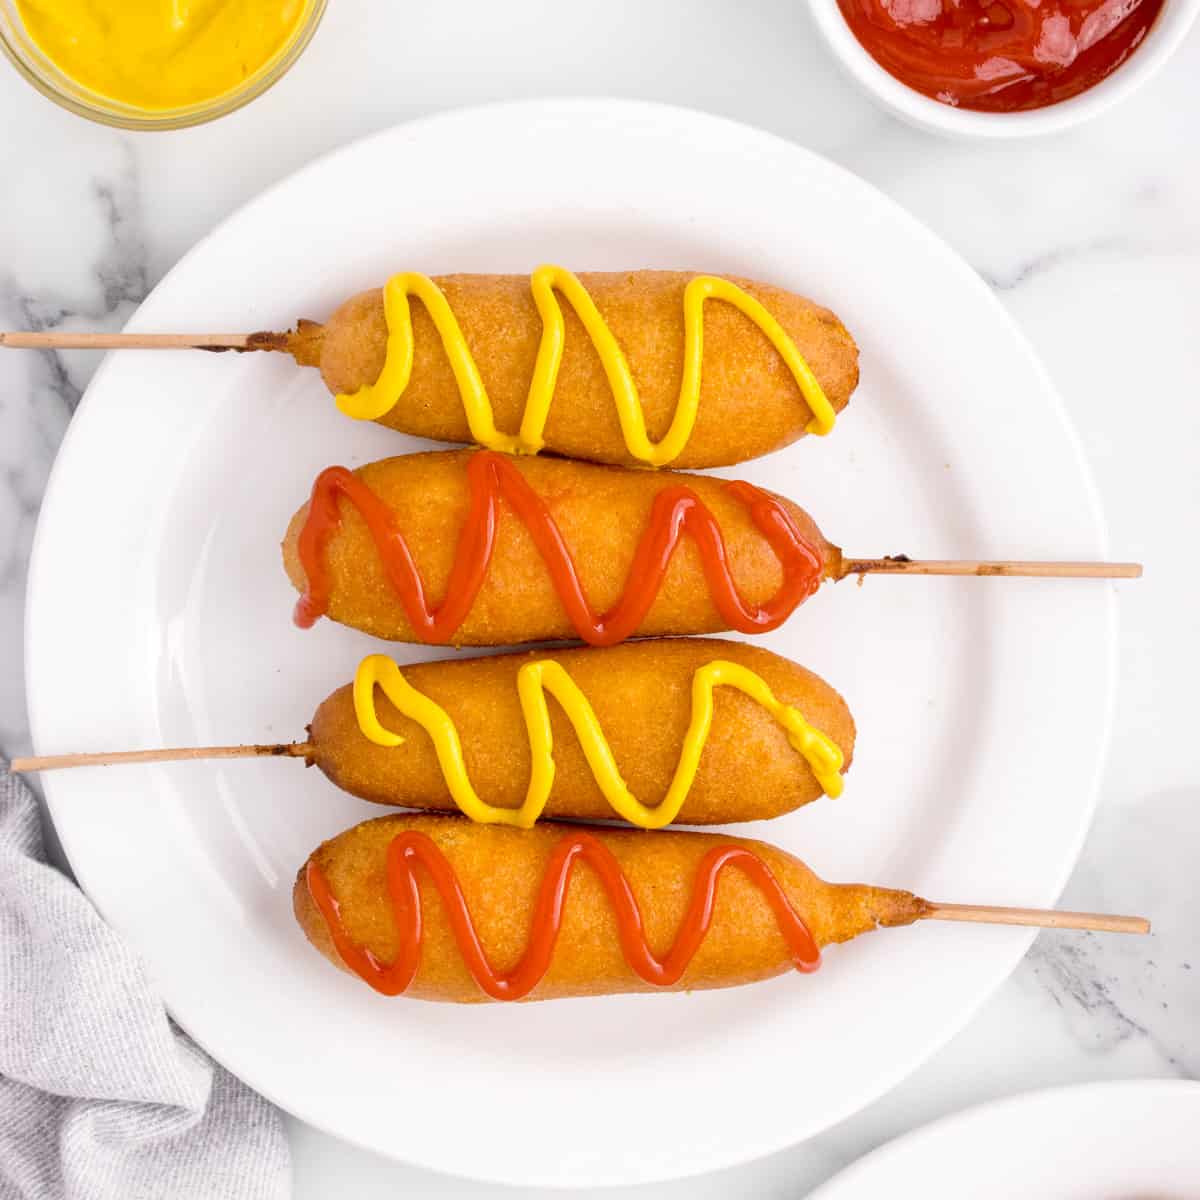 A plate of corn dogs with ketchup and mustard on them.